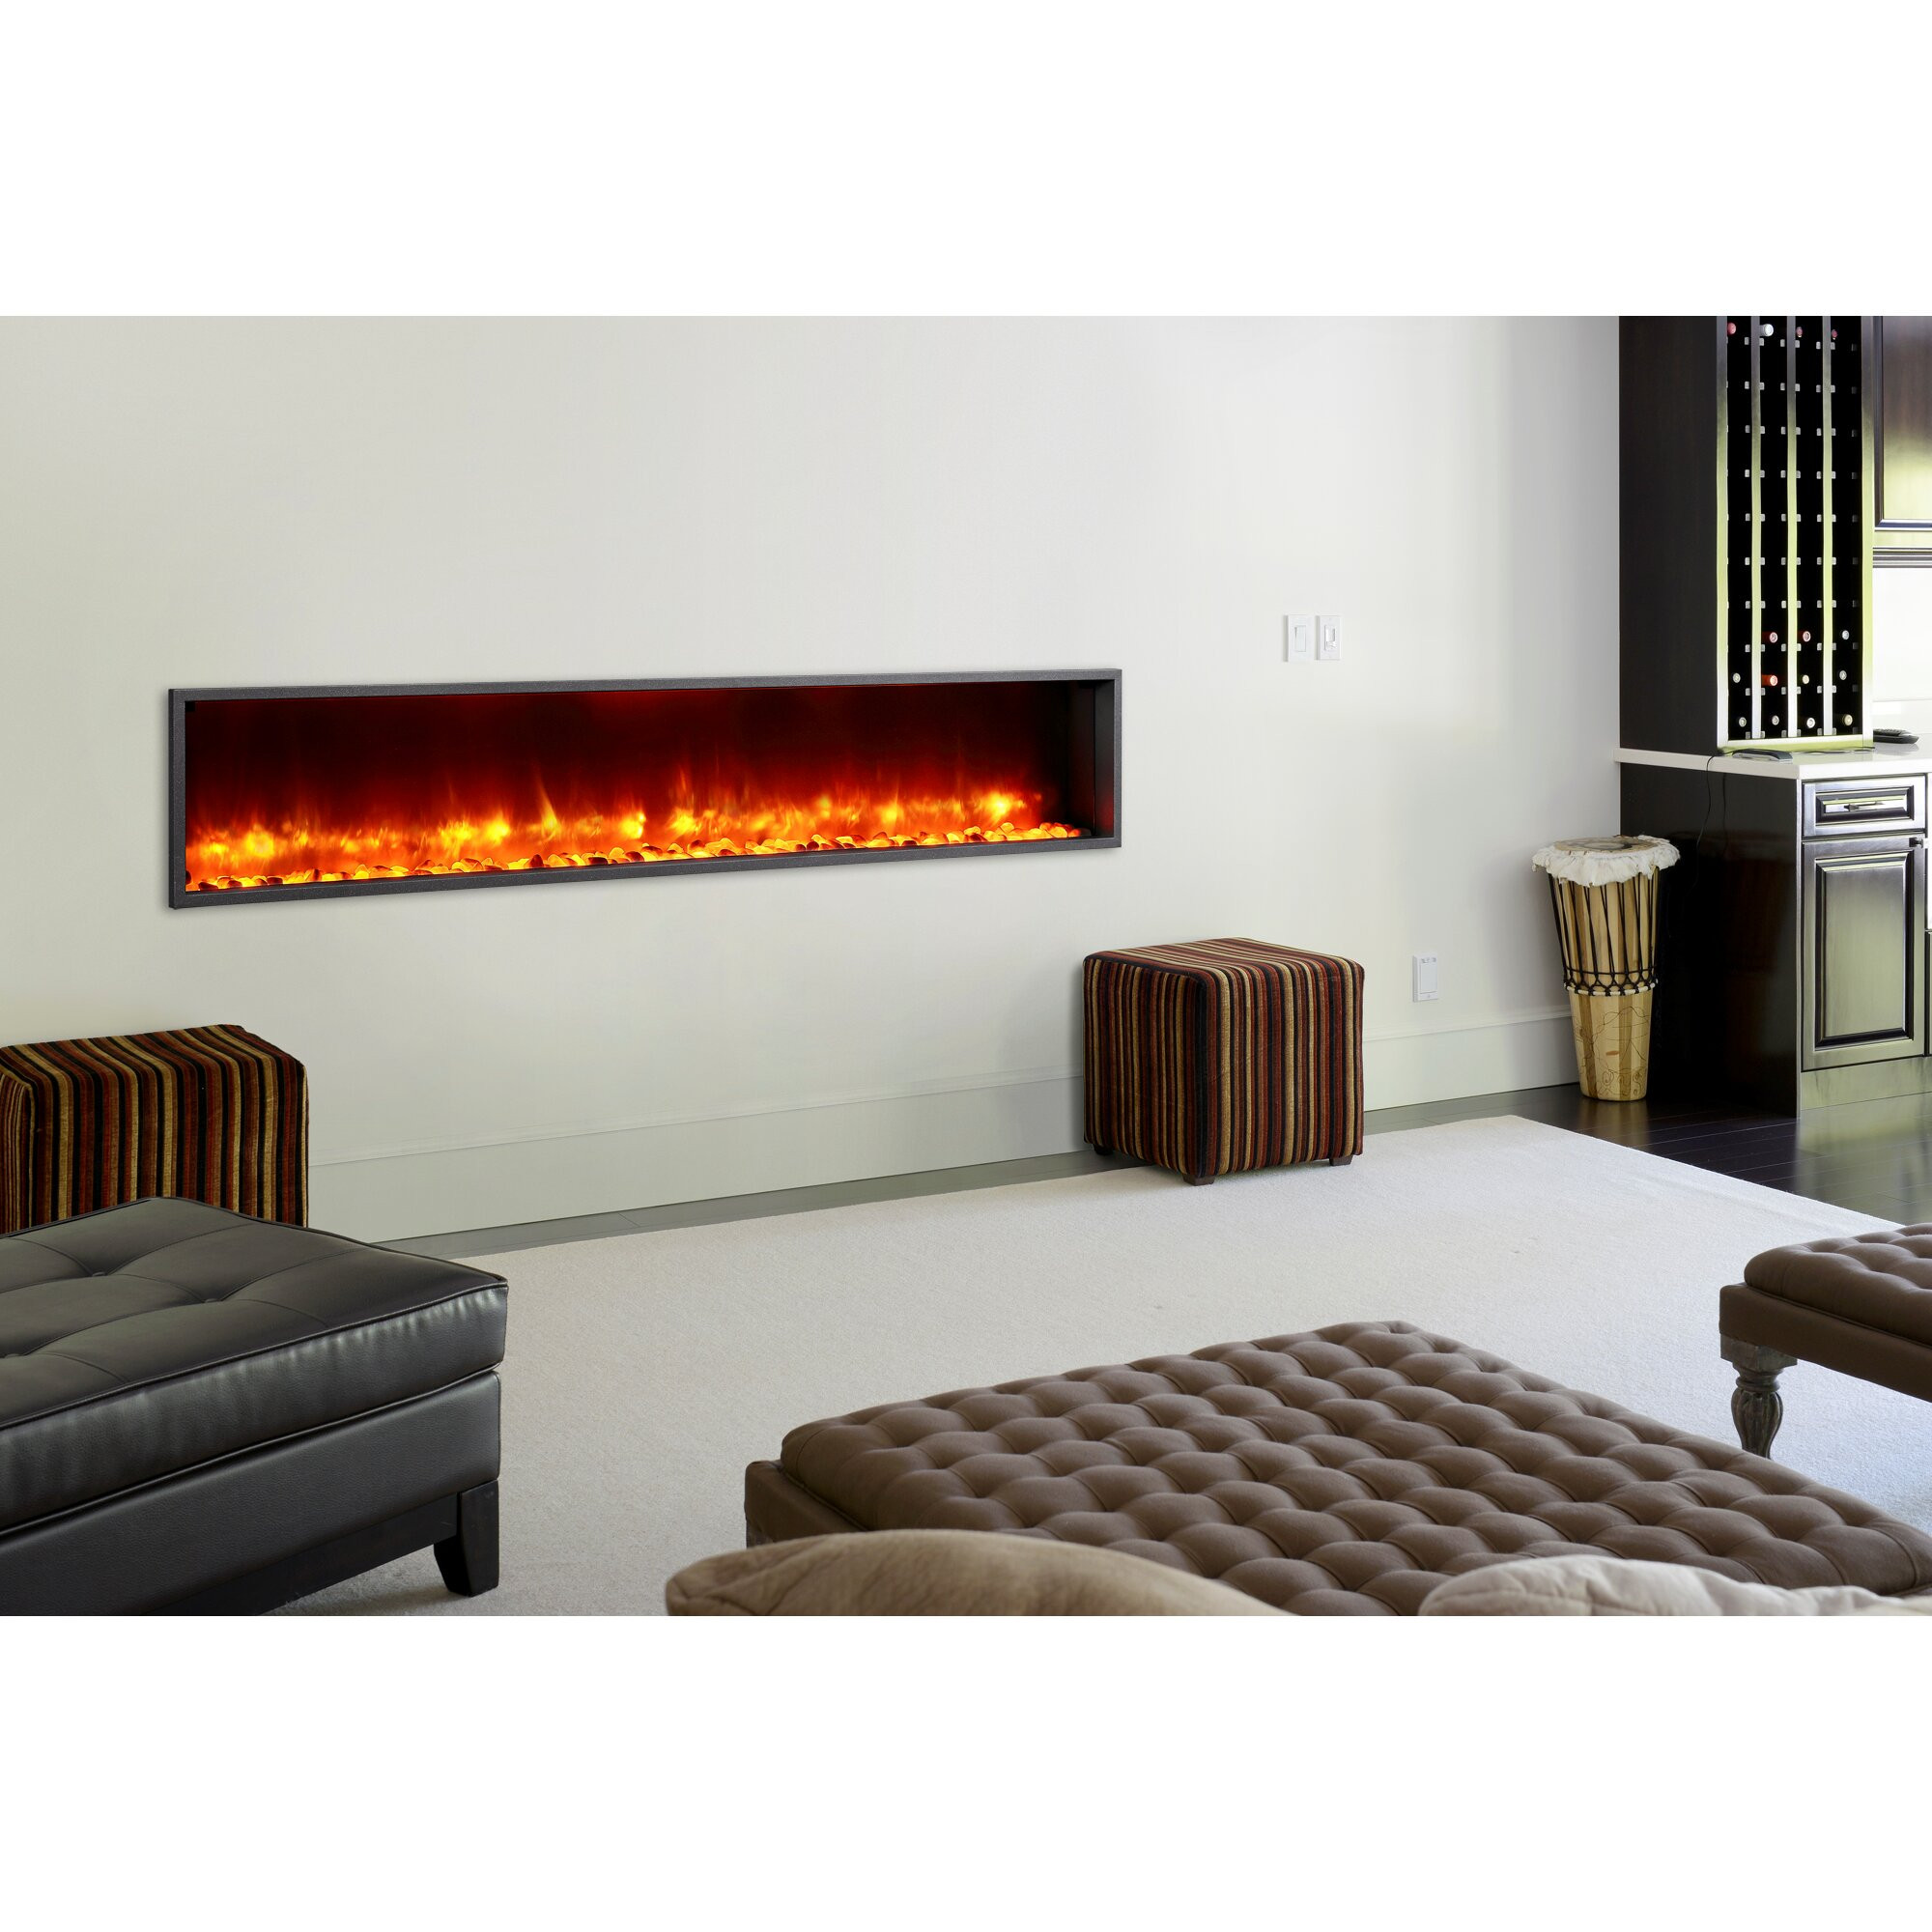 Led Electric Fireplace Insert
 Dynasty 79" Built in LED Wall Mount Electric Fireplace